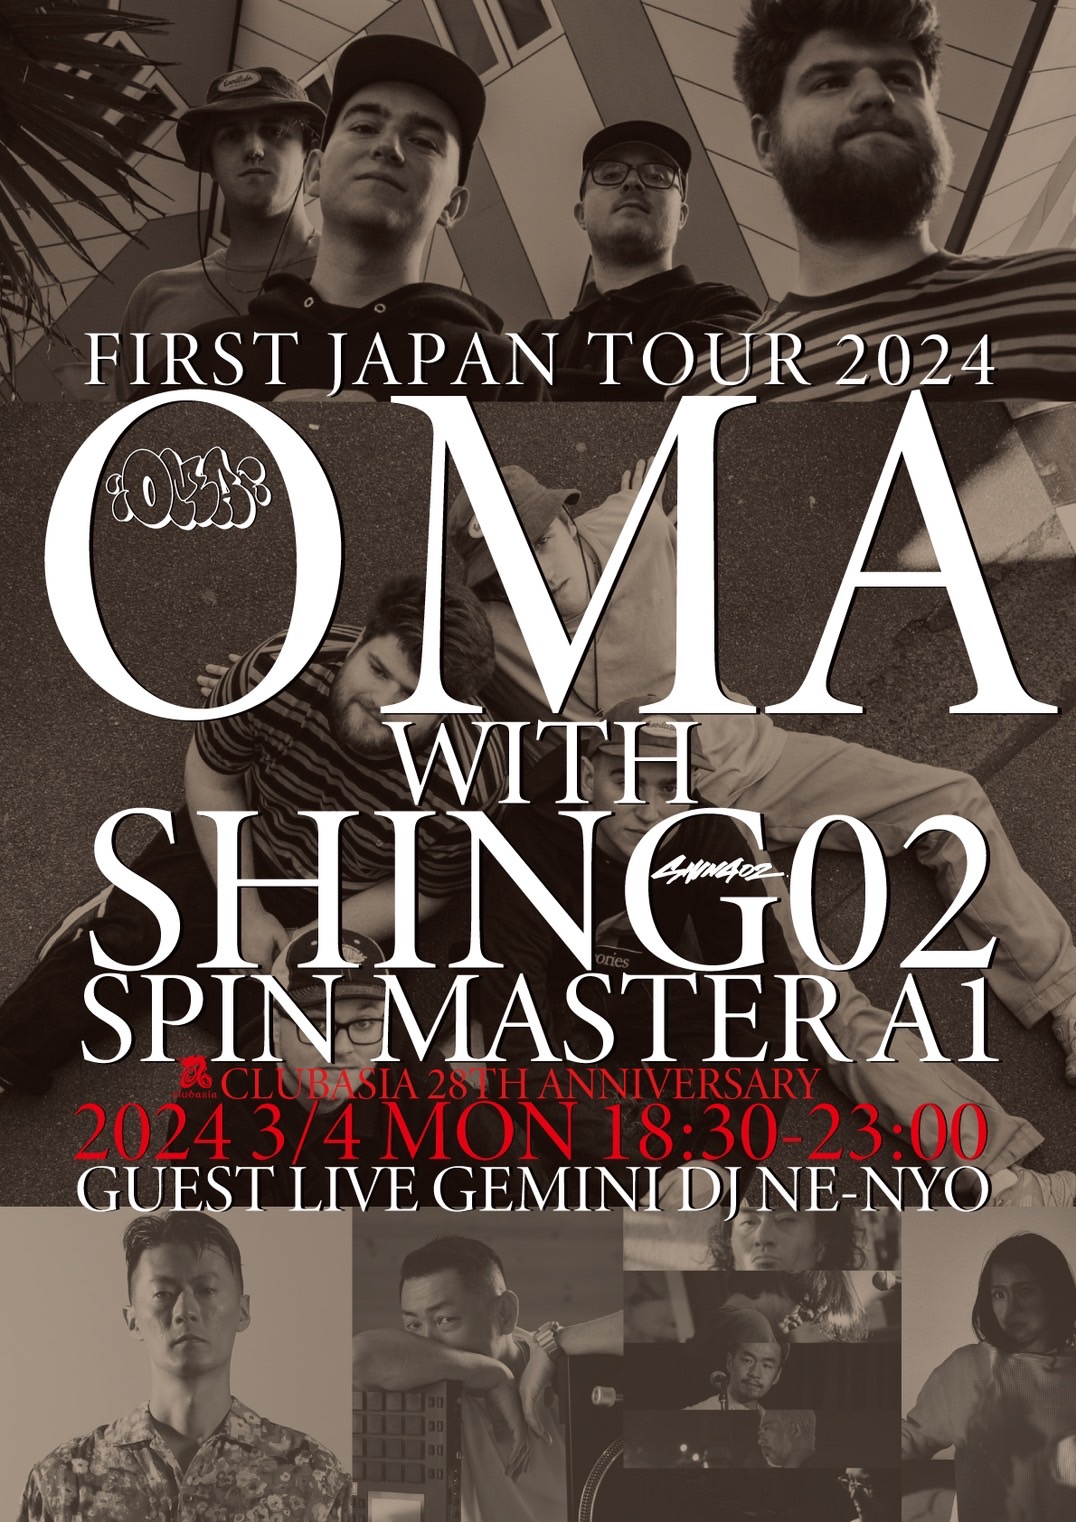 clubasia 28th Anniversary OMA -First Japan Tour 2024- with SHING02